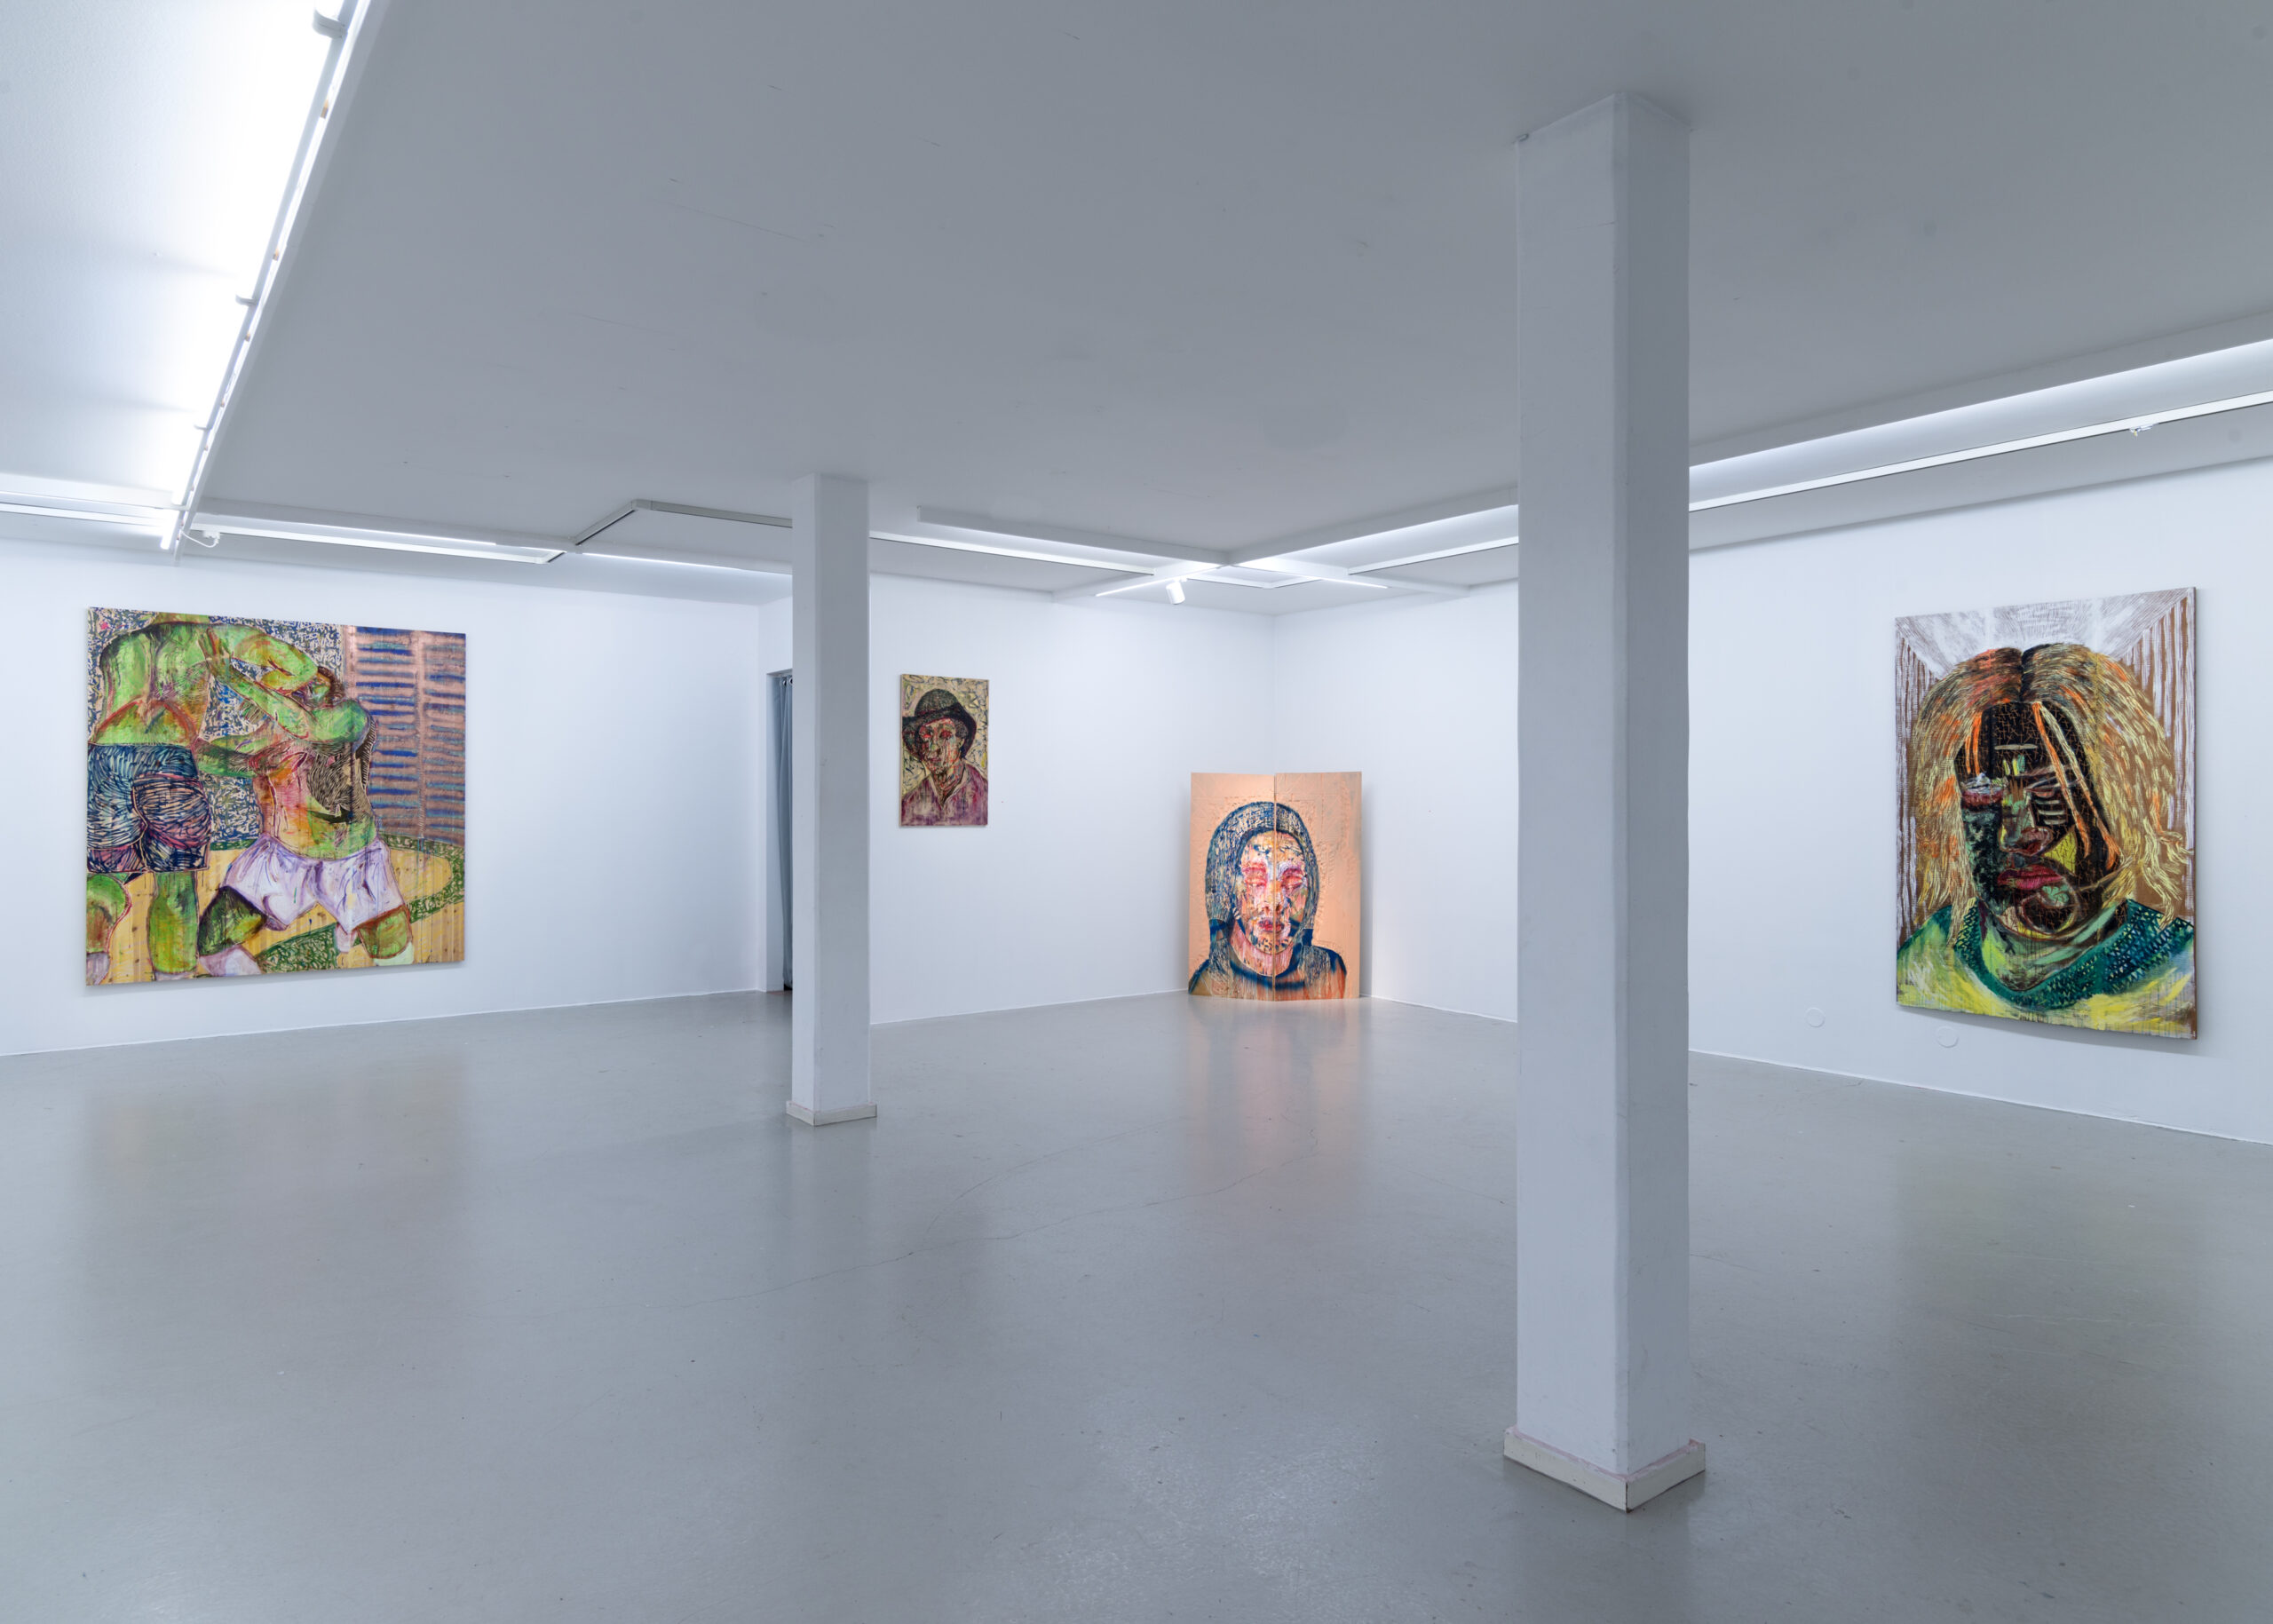 Camilla Vuorenmaa, Installation view, In The Belly of Painting, at Galleri Thomassen, 2017